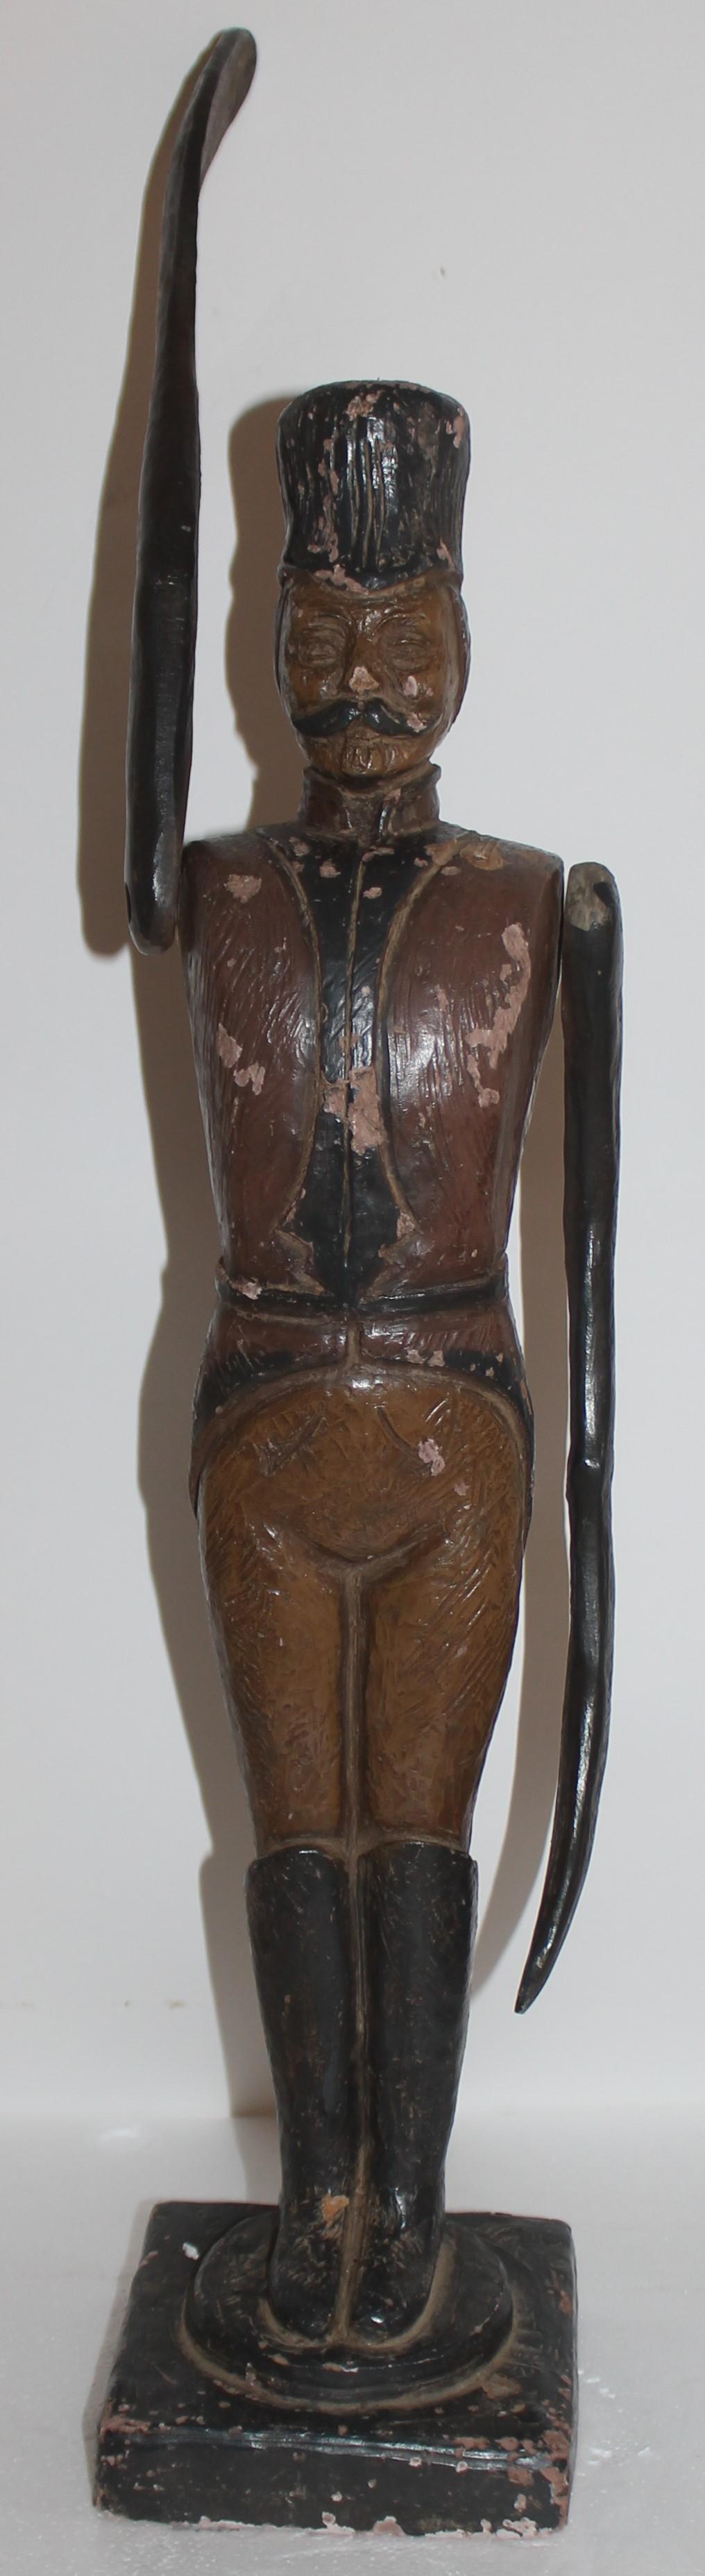 This folk terracotta sculpture is depicting a English soldier in uniform - The jointed arms are attached by screws in the shoulder area. It has chips or wear in areas see pictures for close up wear. This is a later 20th c copy of an early 19thc